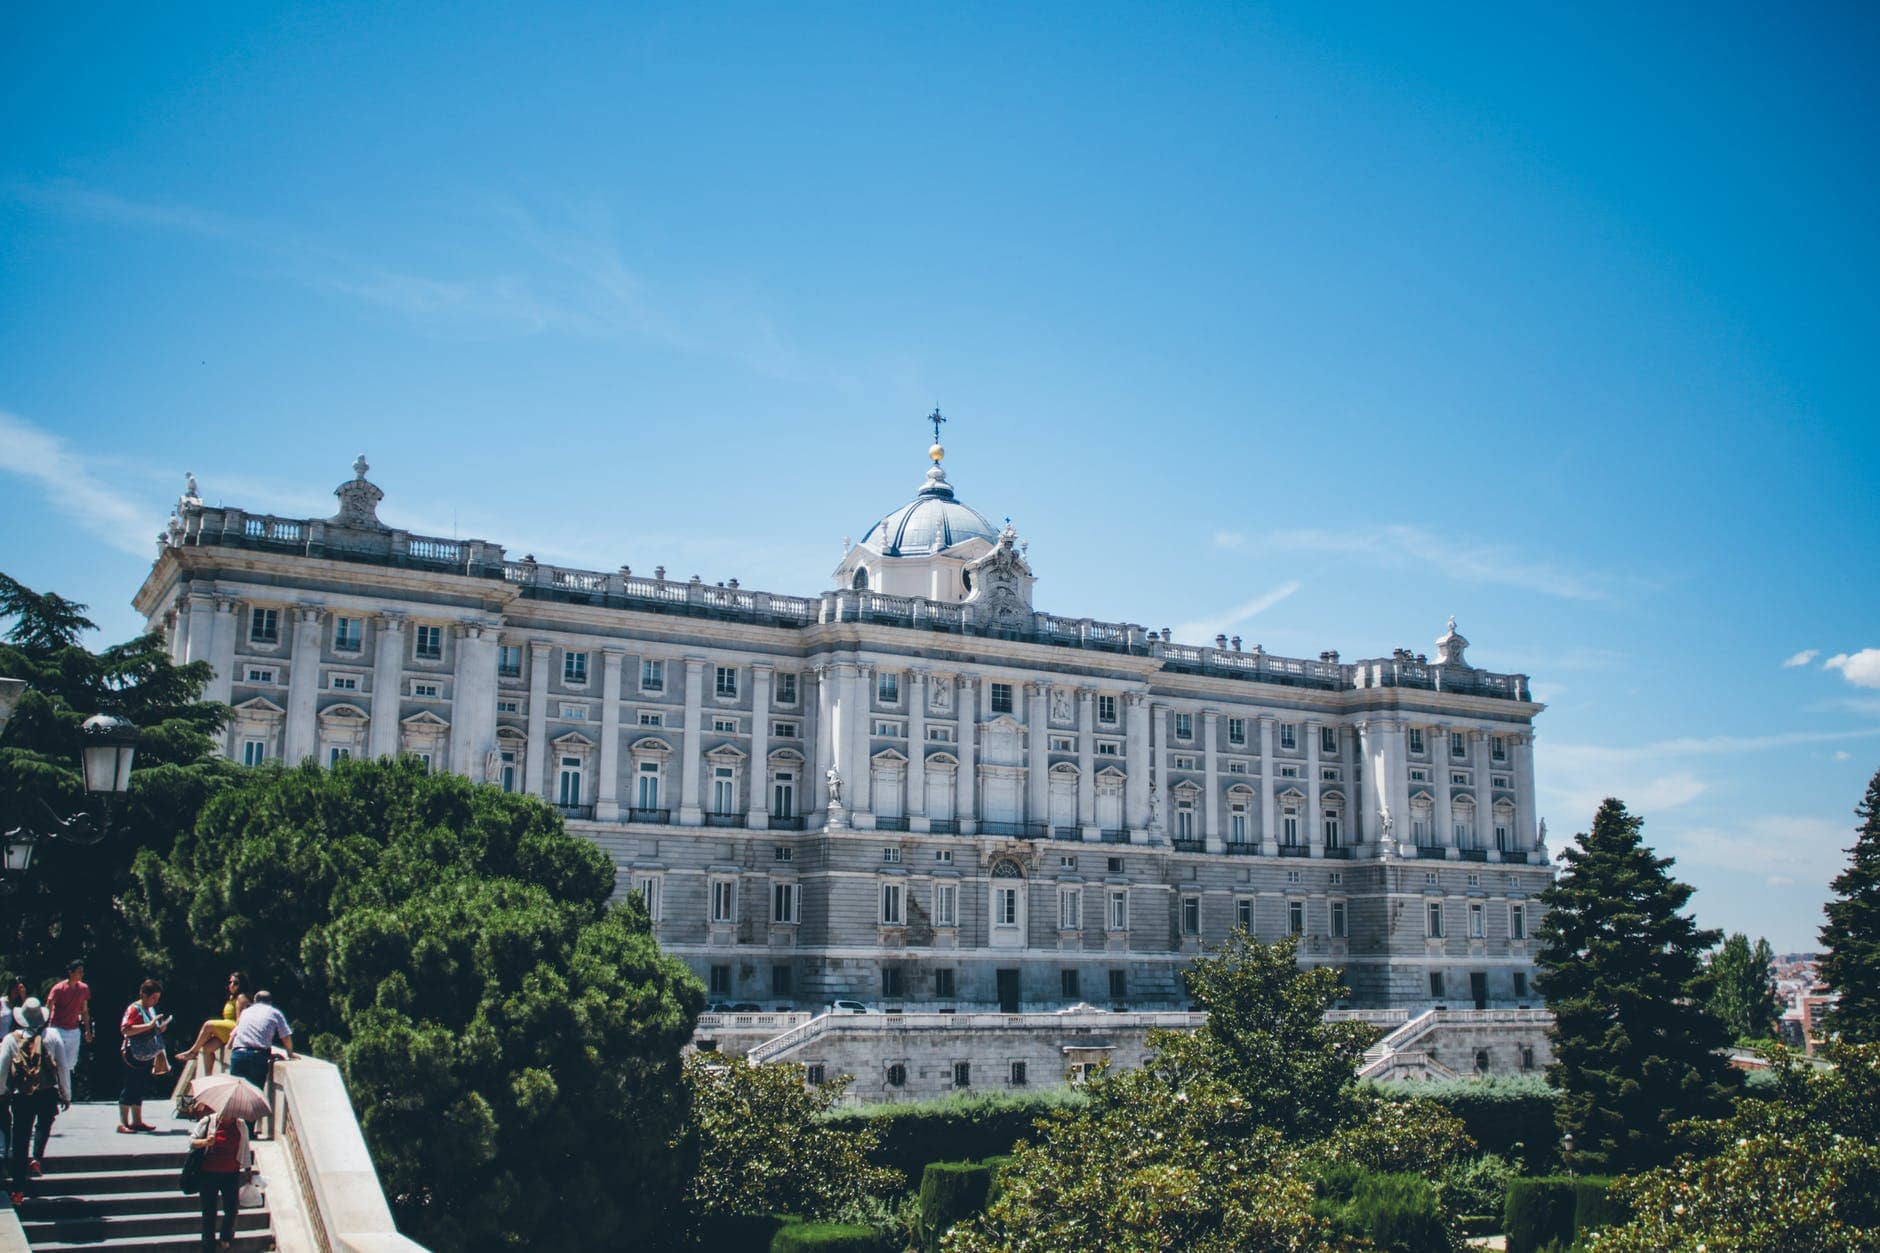 Explore Madrid view of royal palace in spain under a blue sky